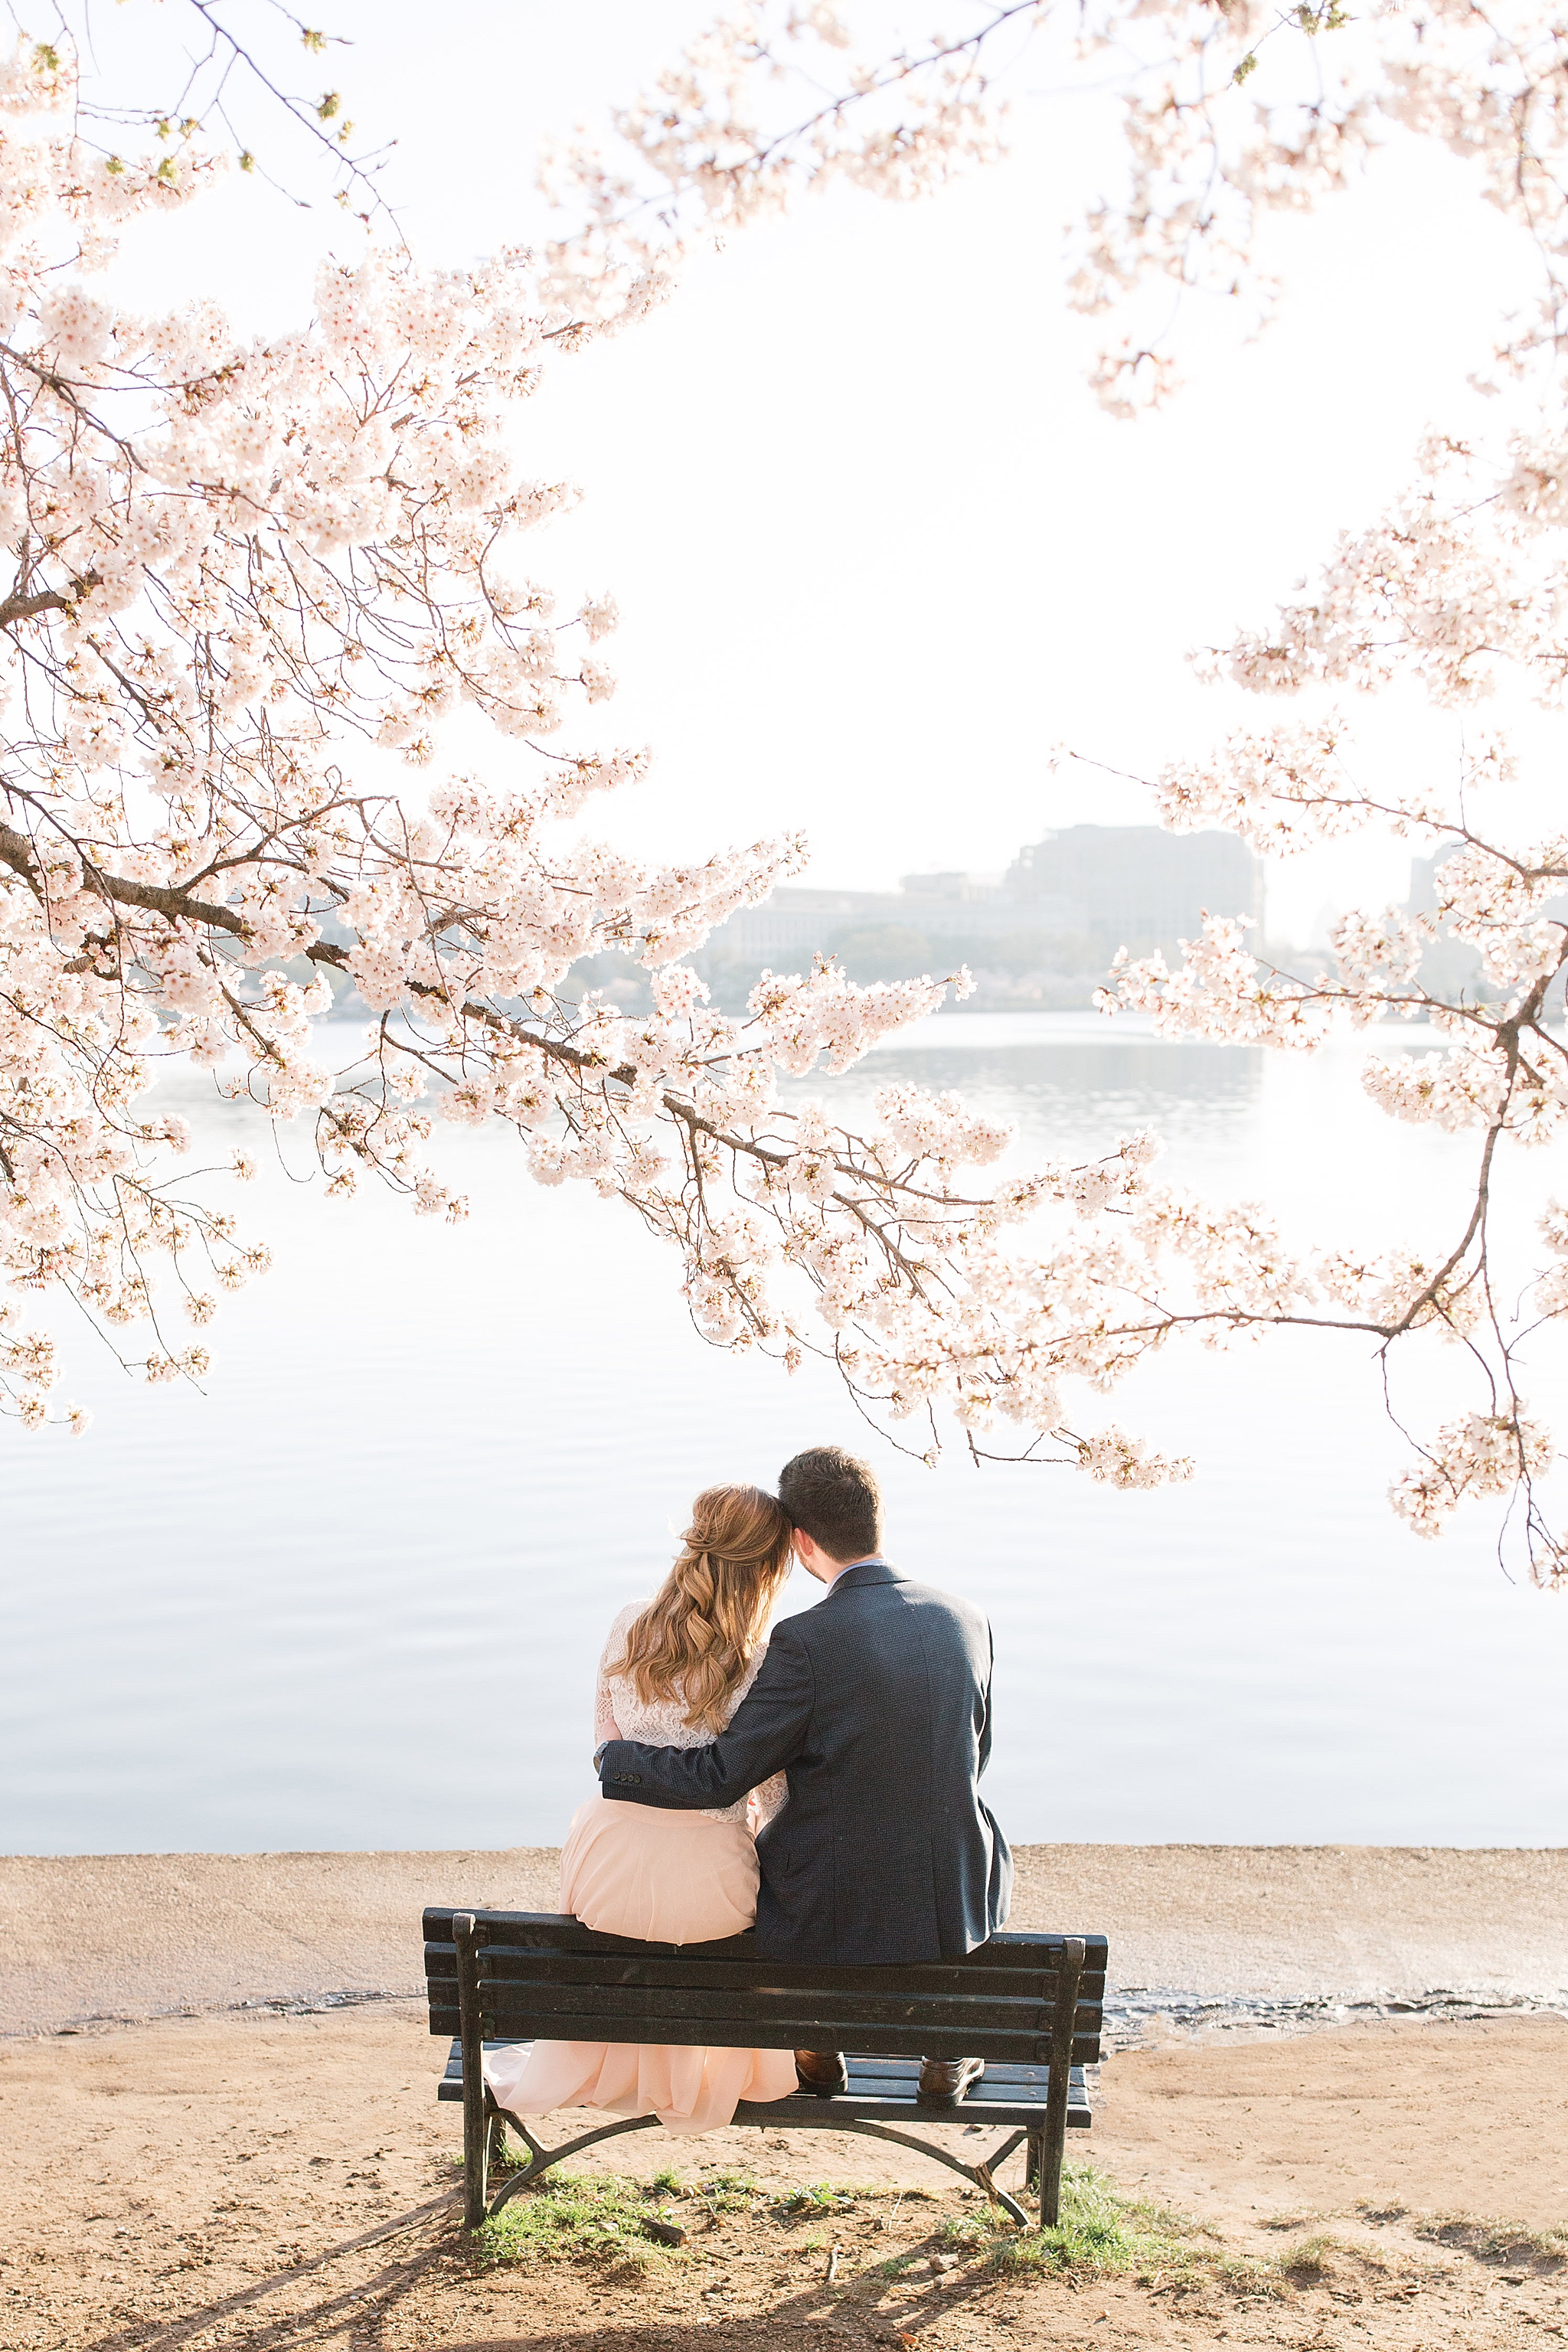 A romantic sunrise on the Tidal Basin in Washington, DC amongst the iconic cherry blossoms.  